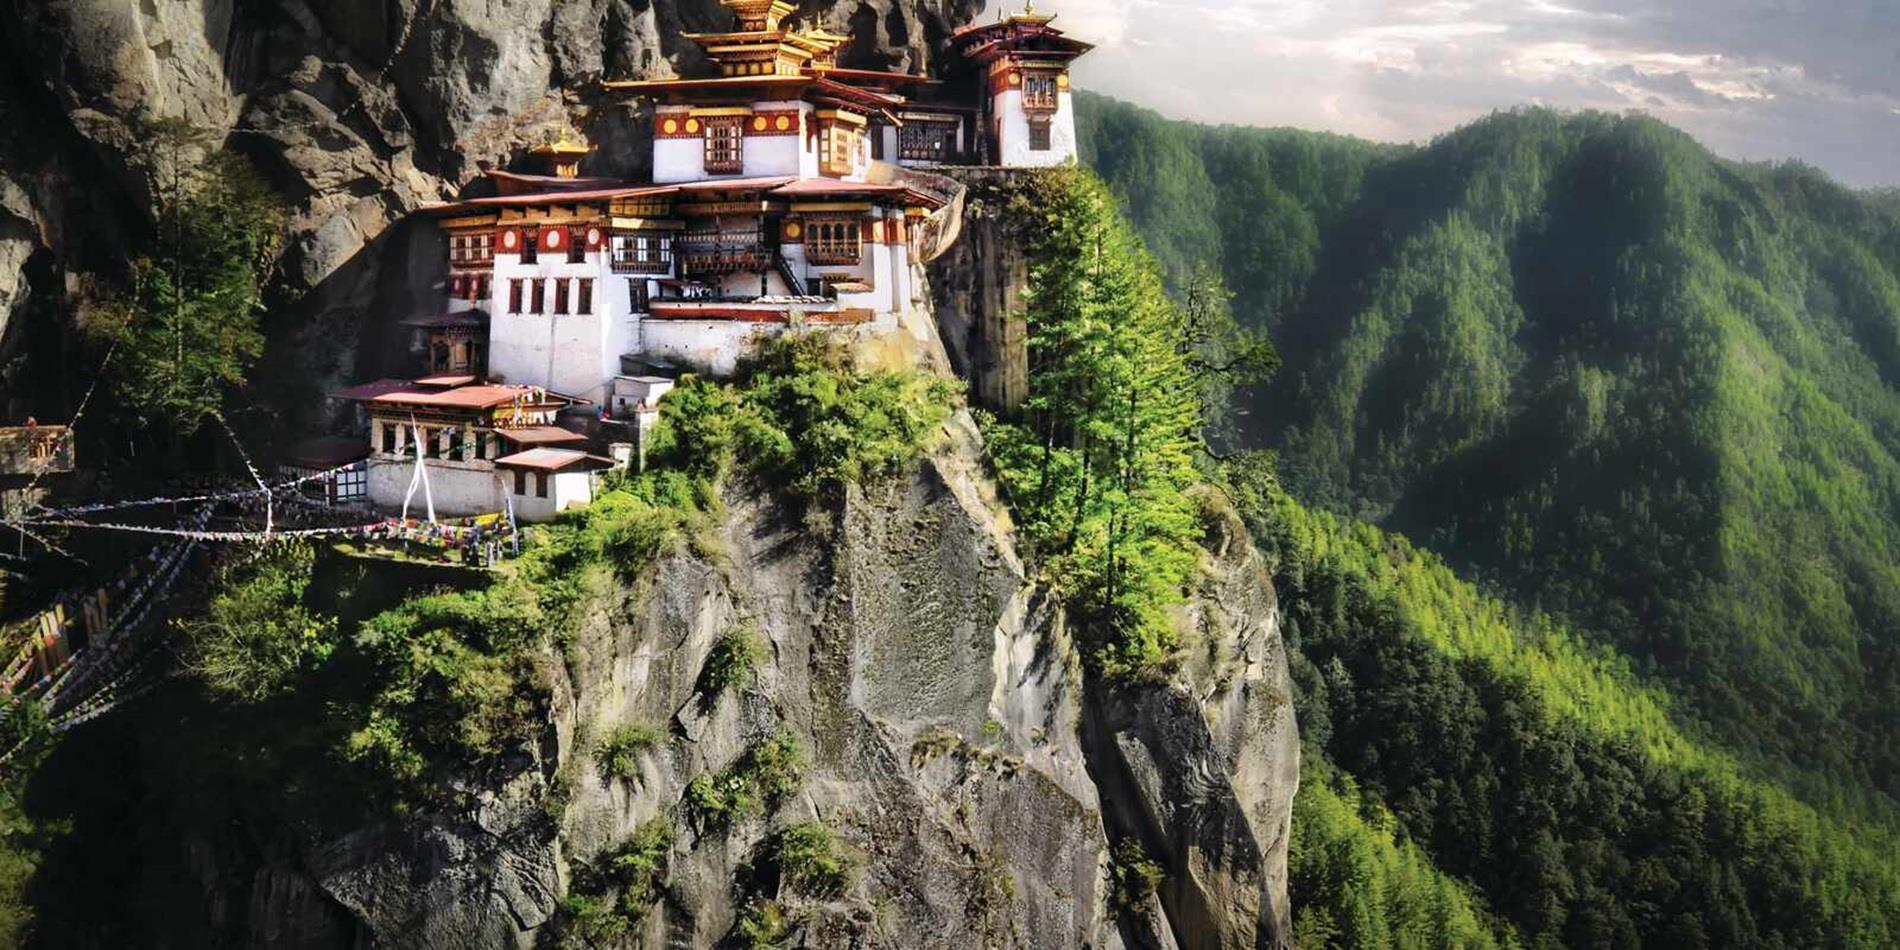 Here are some interesting facts about Bhutan.